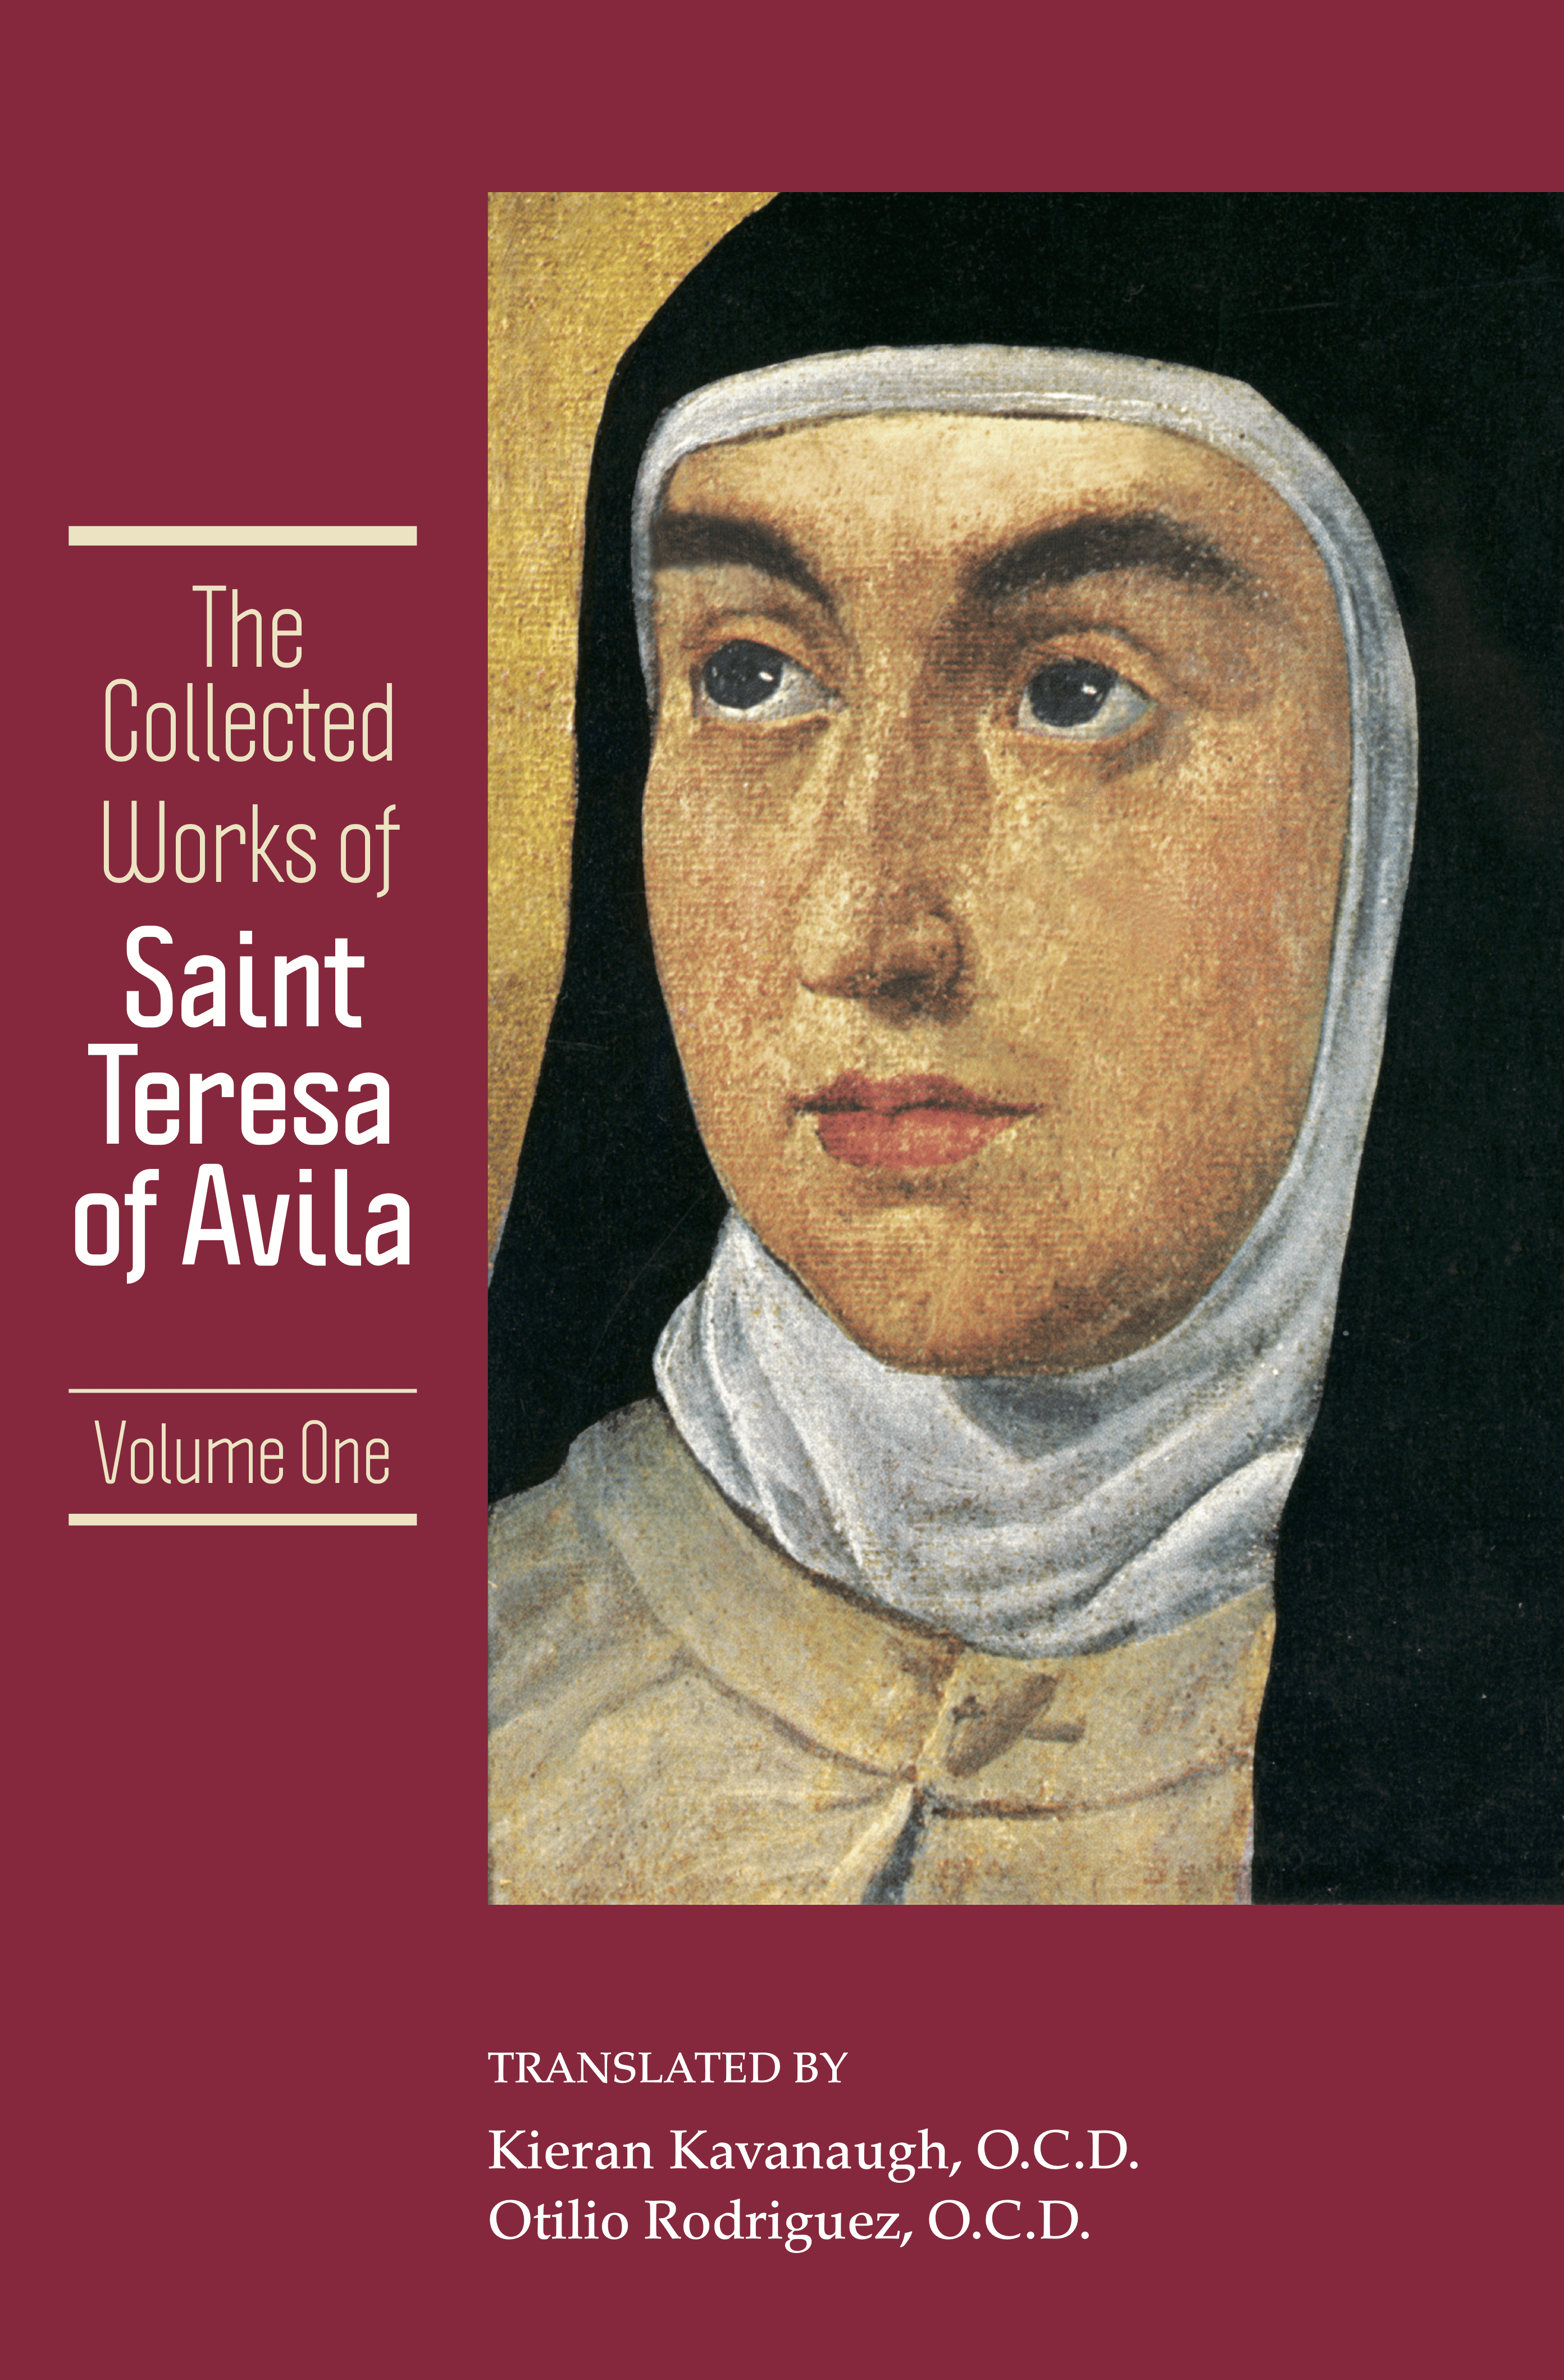 The Collected Works of St. Teresa of Avila, vol. 1